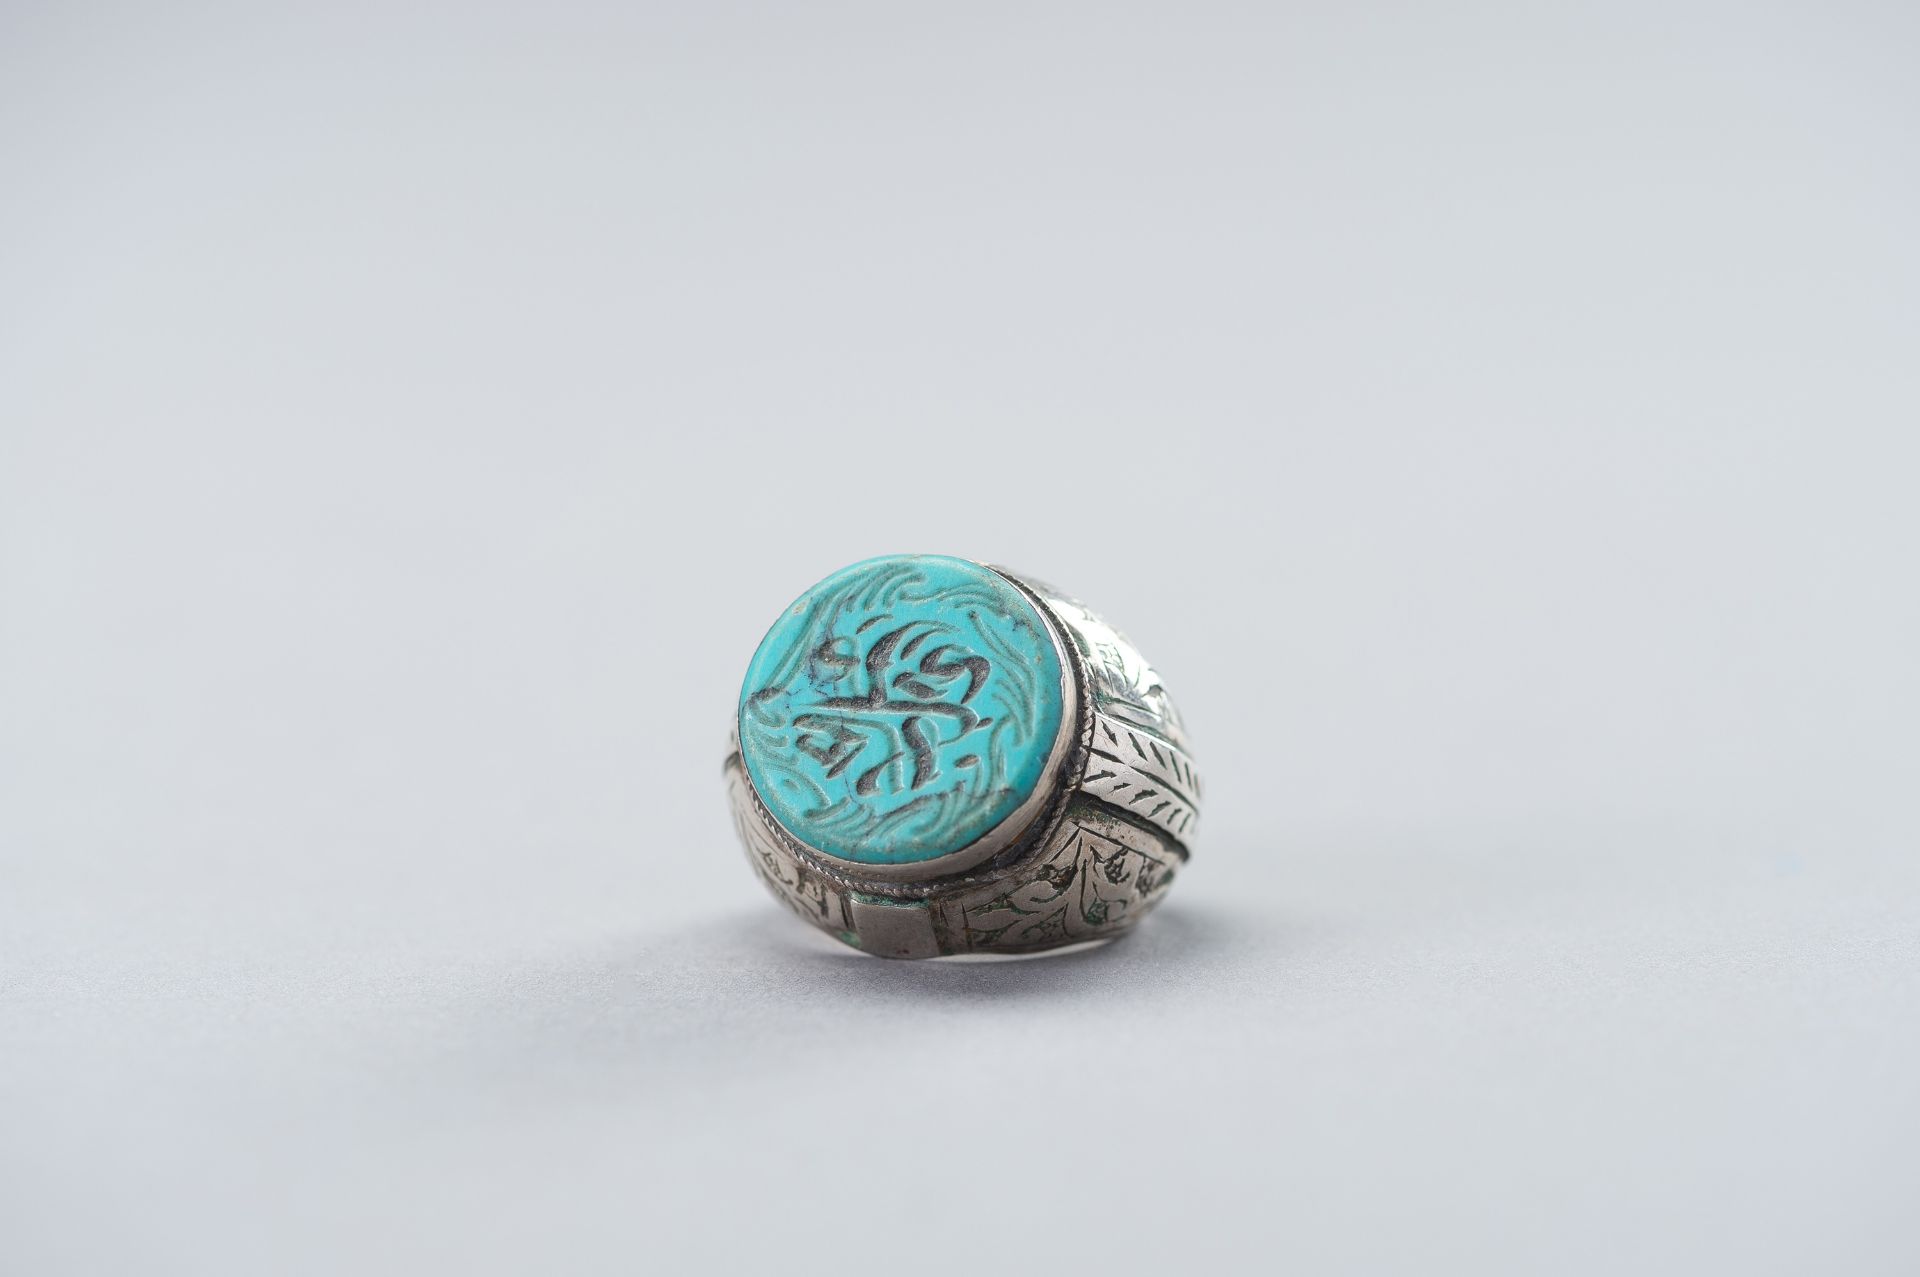 A PERSIAN SILVER RING WITH TURQUOISE MATRIX INTAGLIO, 19TH CENTURY - Image 3 of 9